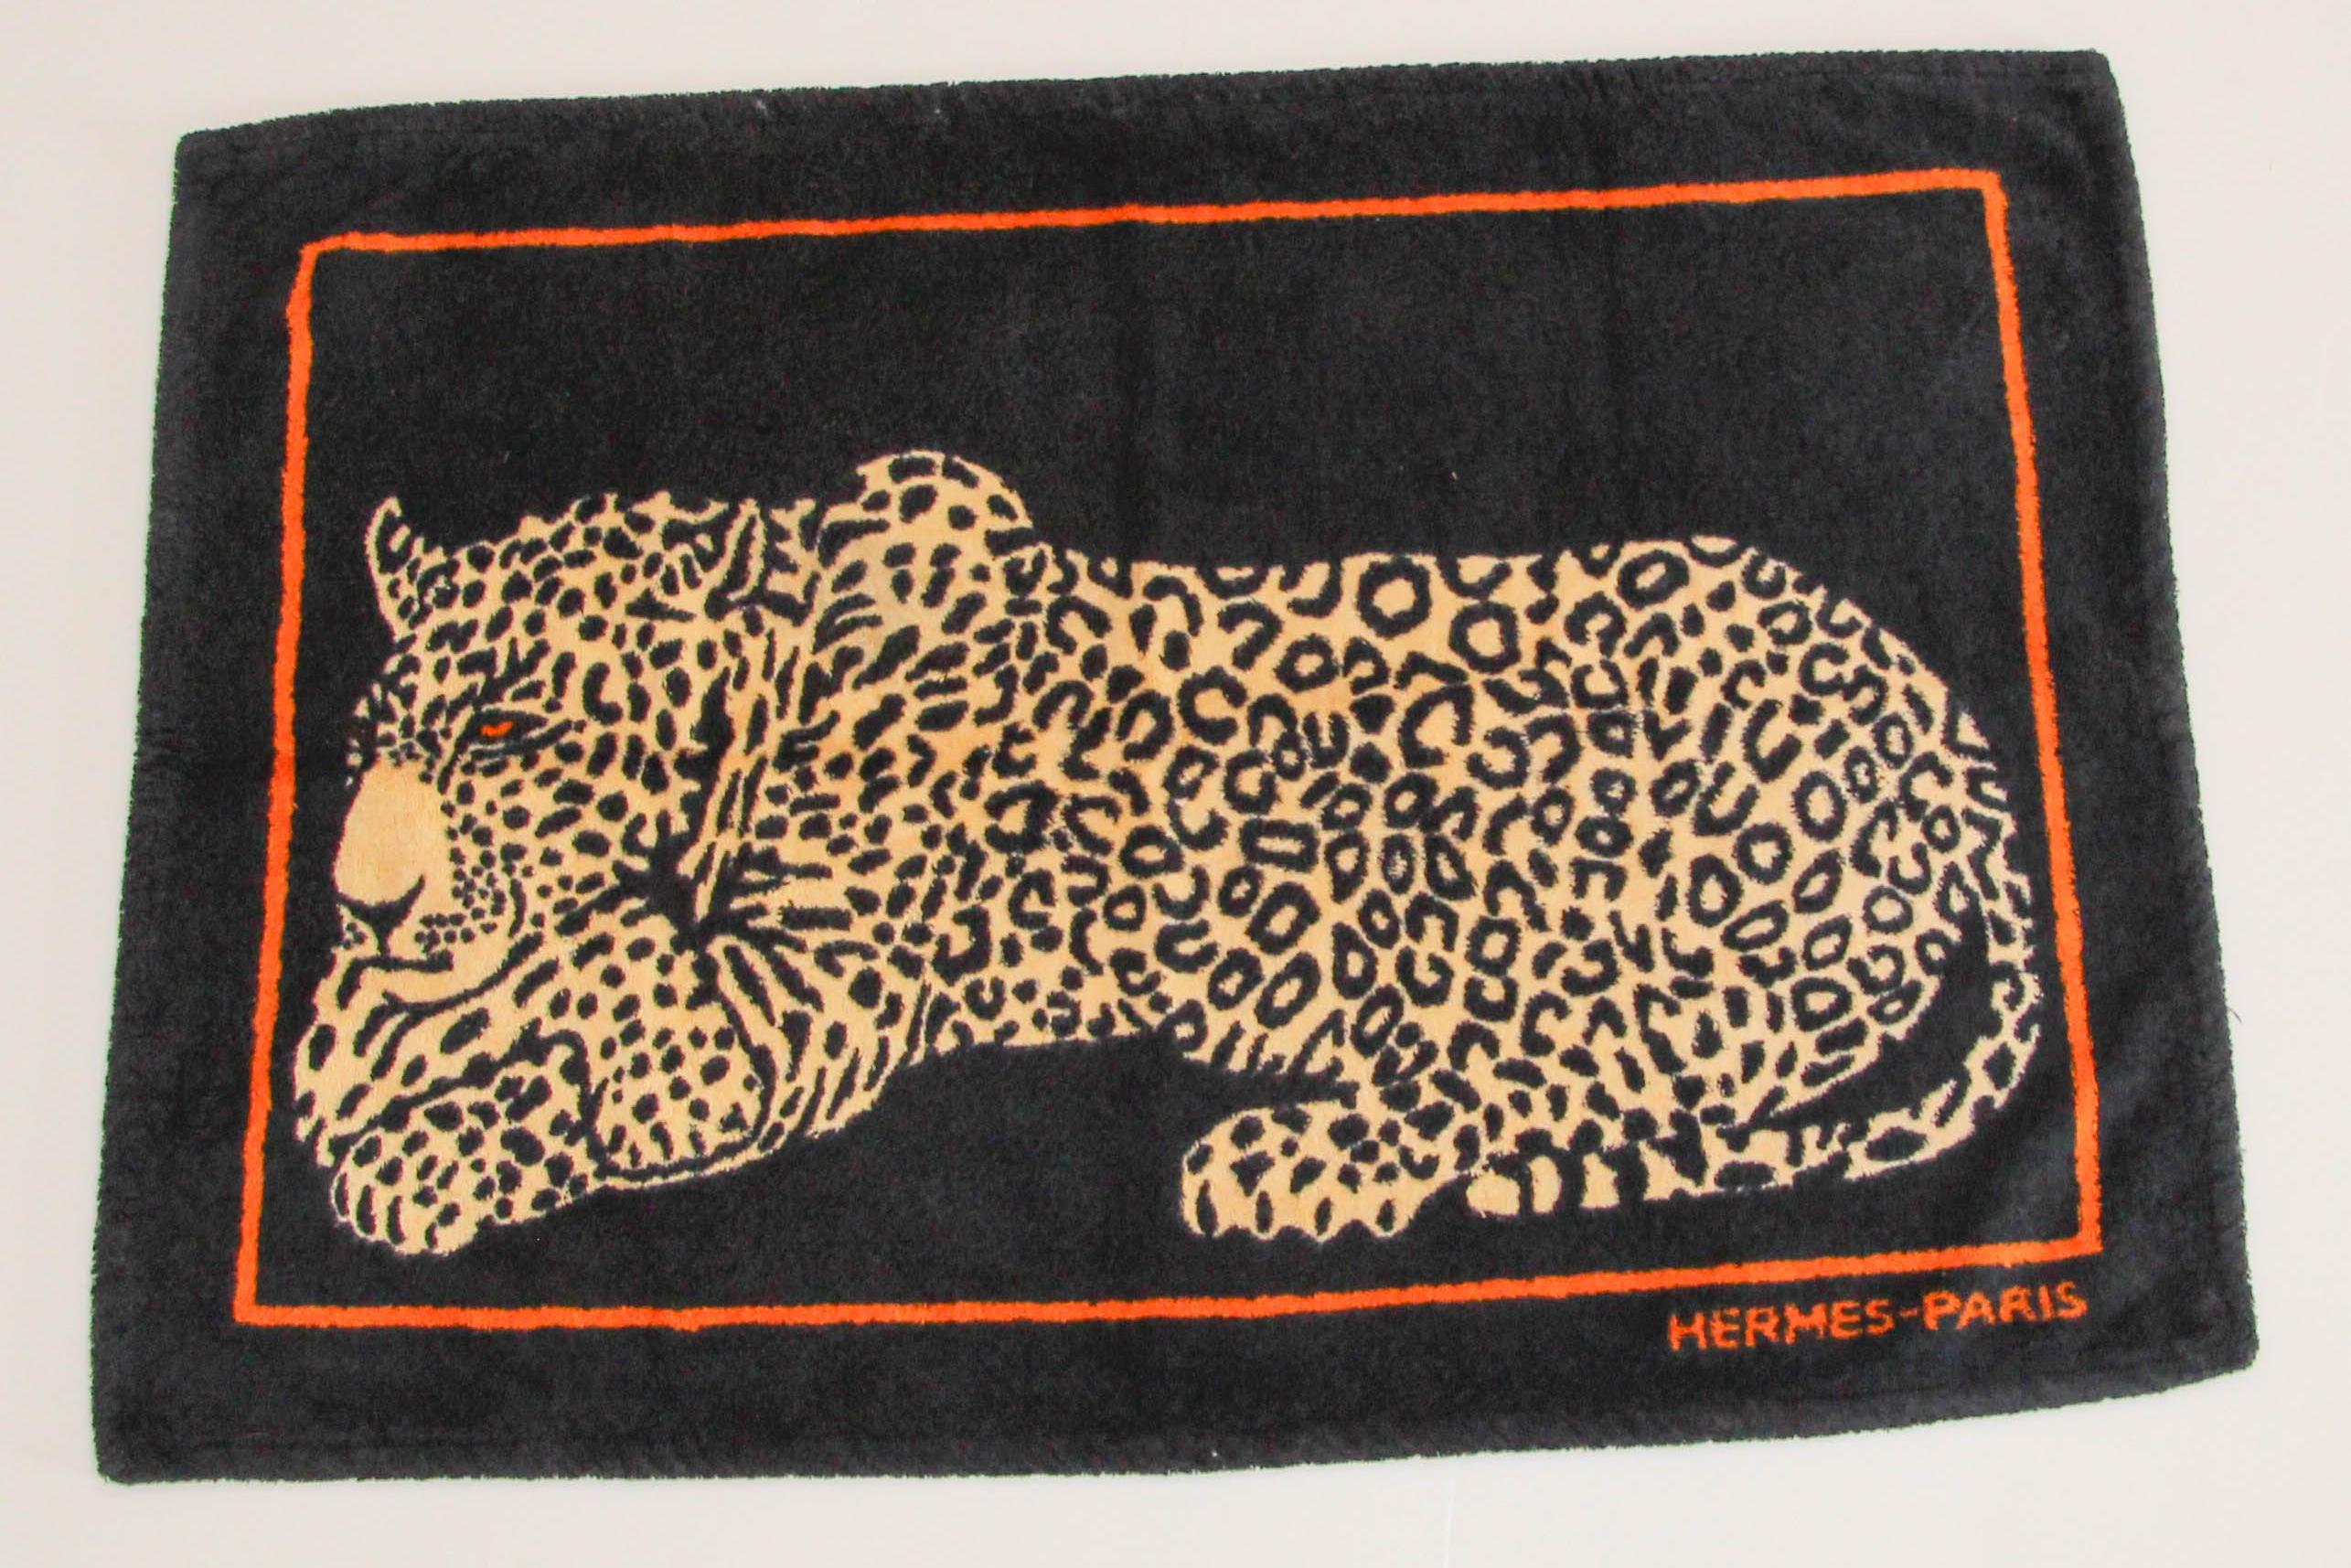 Hermes Paris Small Bath Mat with a Leopard Print in Black and Orange 7